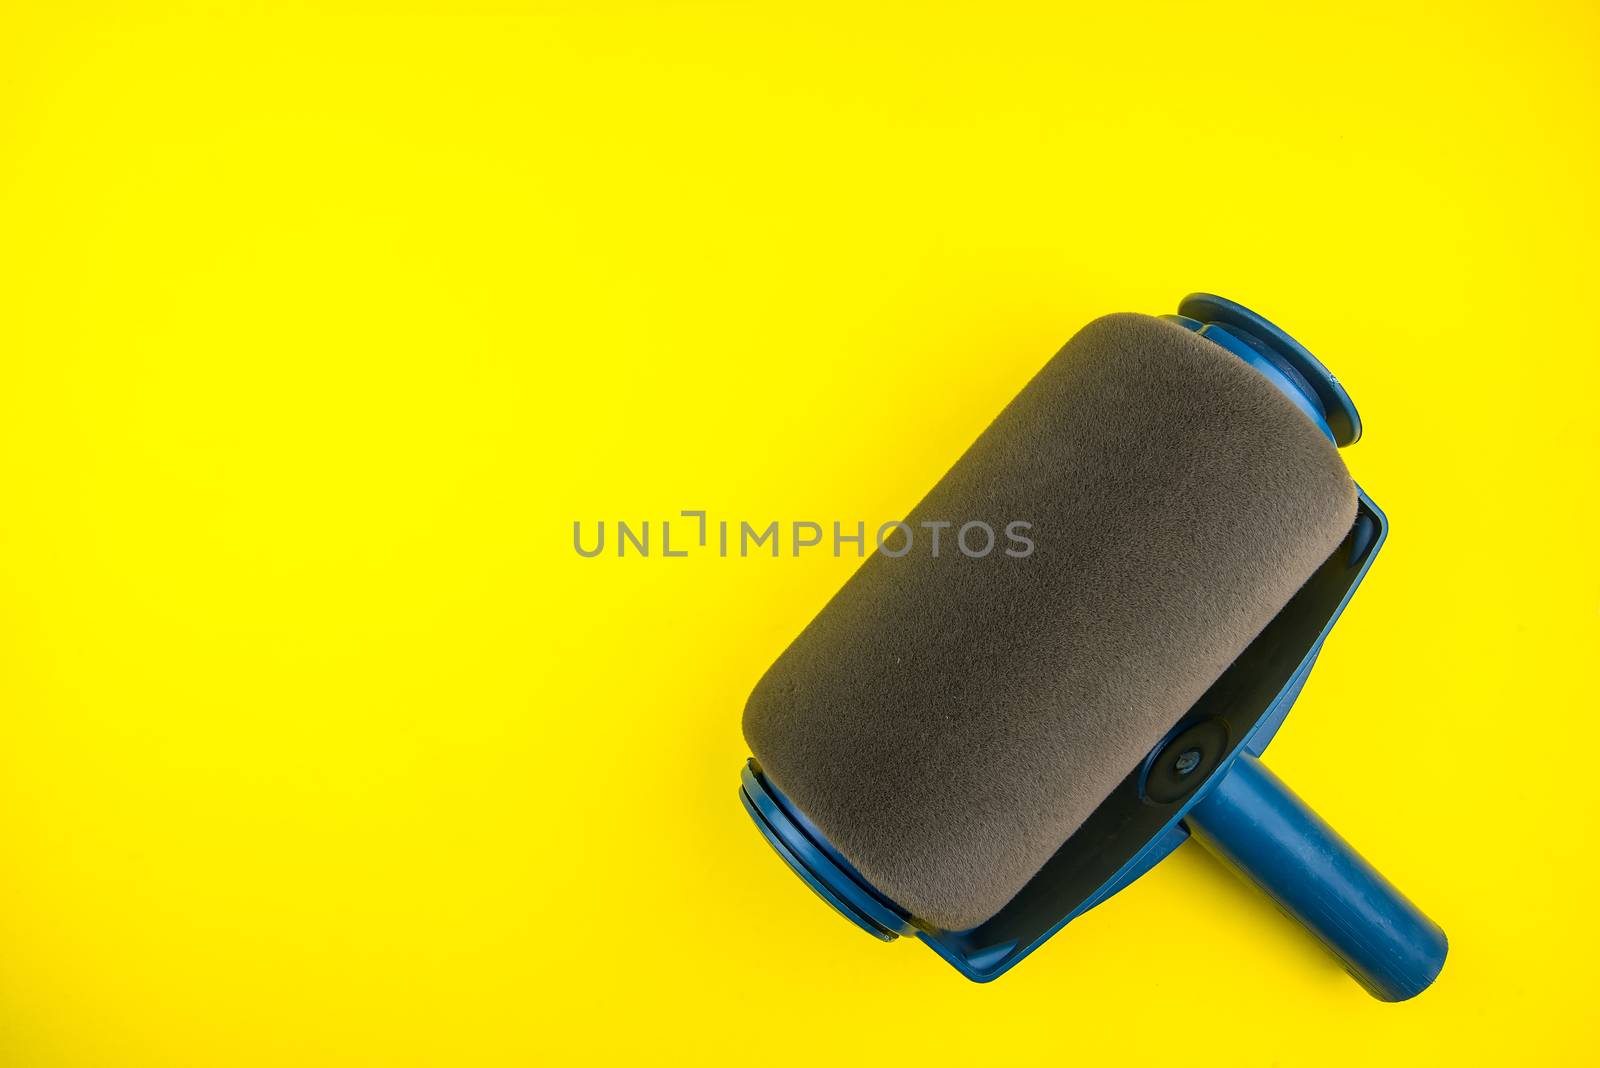 Top view of Paint roller on yellow background with copy space, minimalistic style